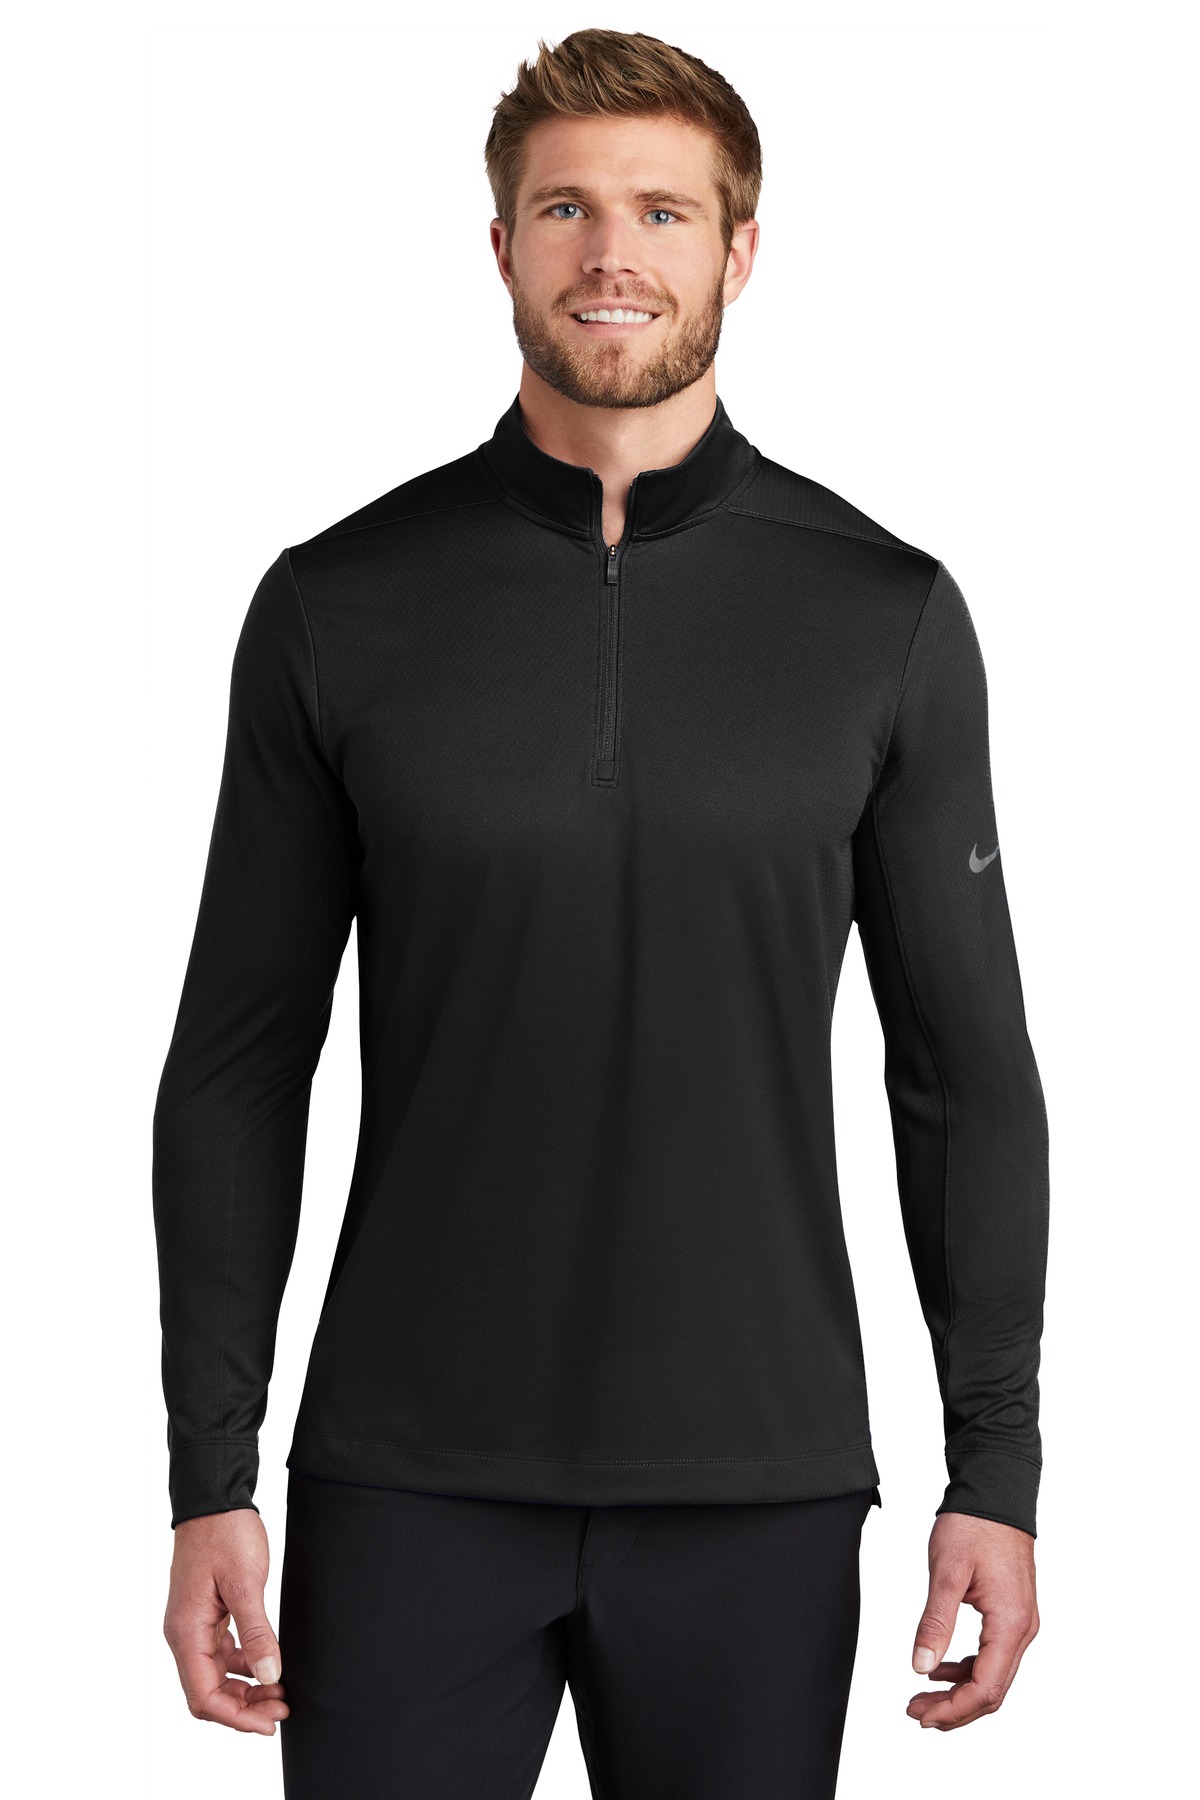 Buy Nike Dry 1/2-Zip Cover-Up - Nike Online at Best price - TN